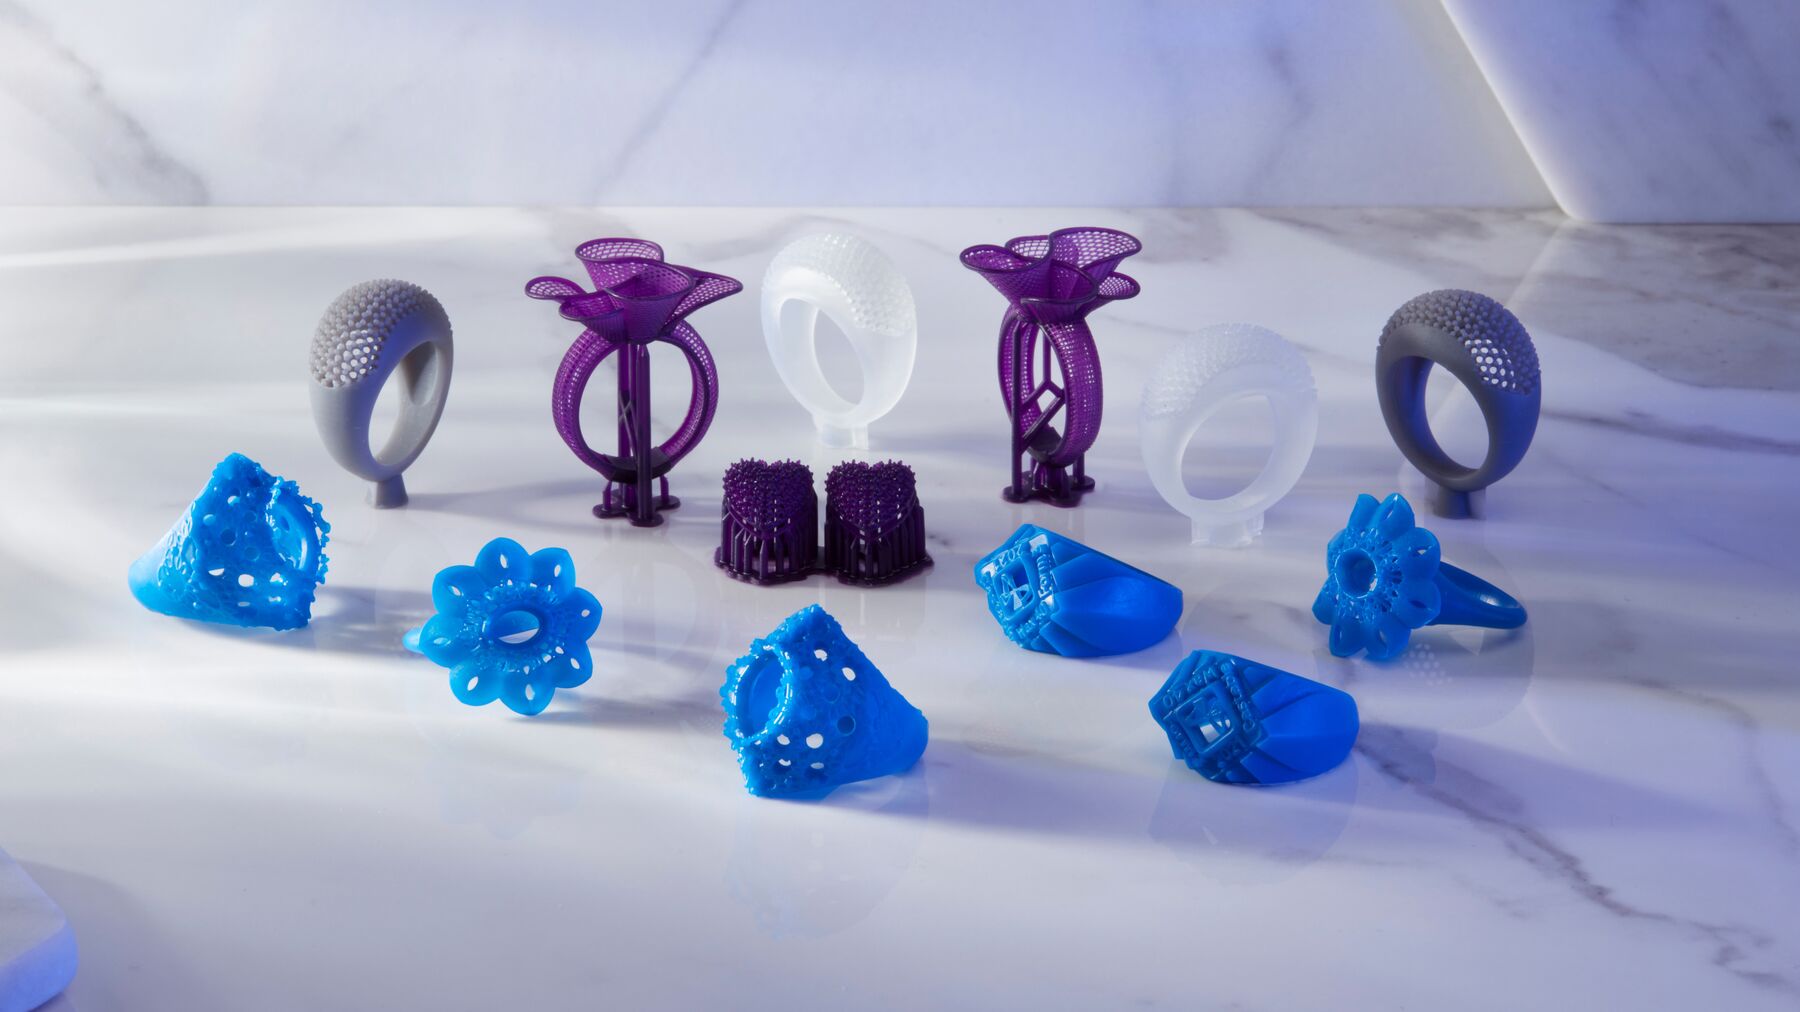 3D printed jewellery parts and resin